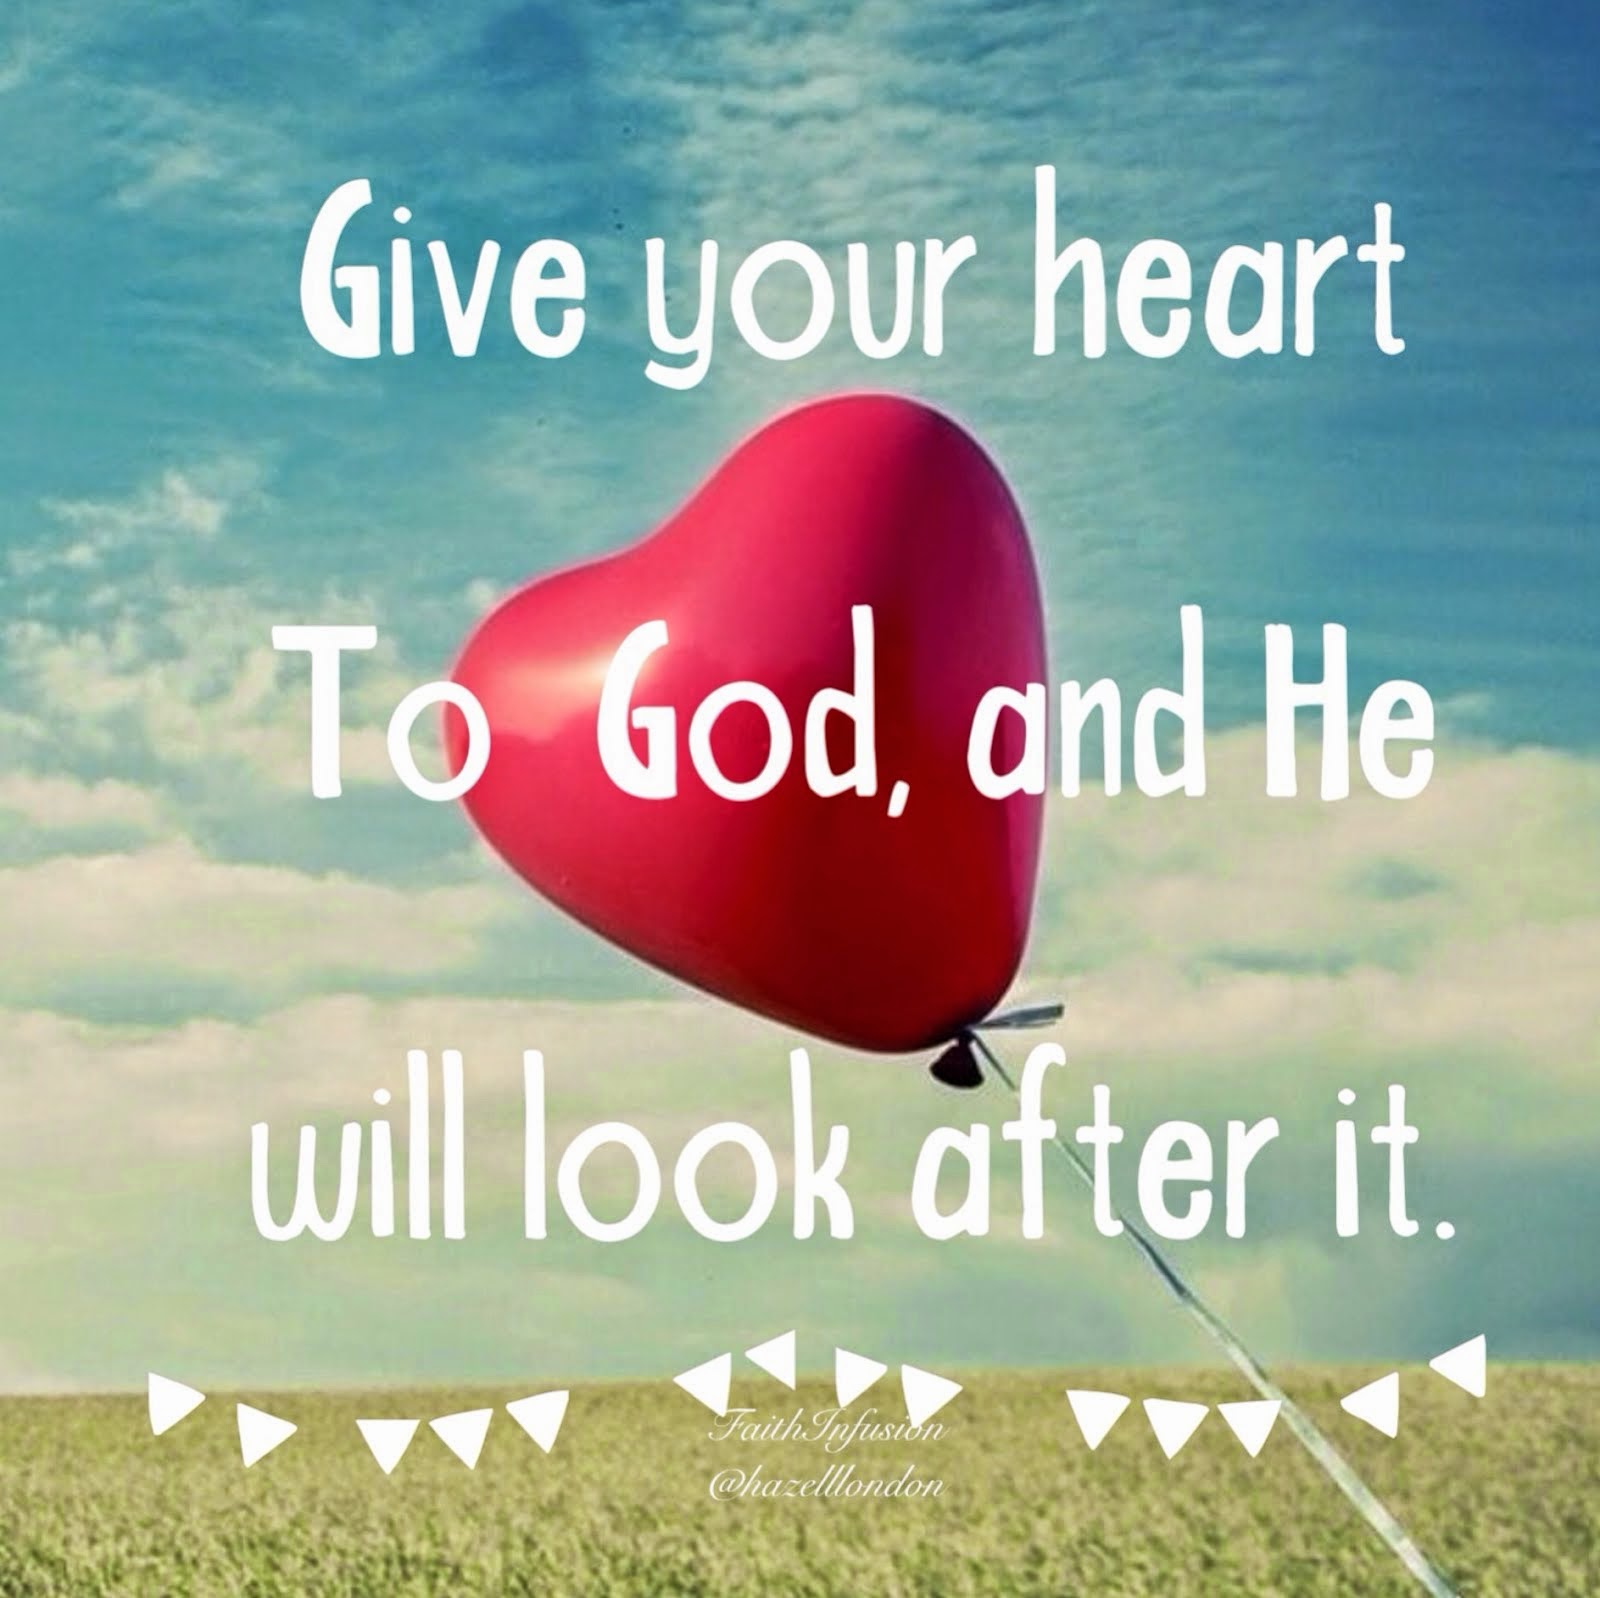 Give your heart to God